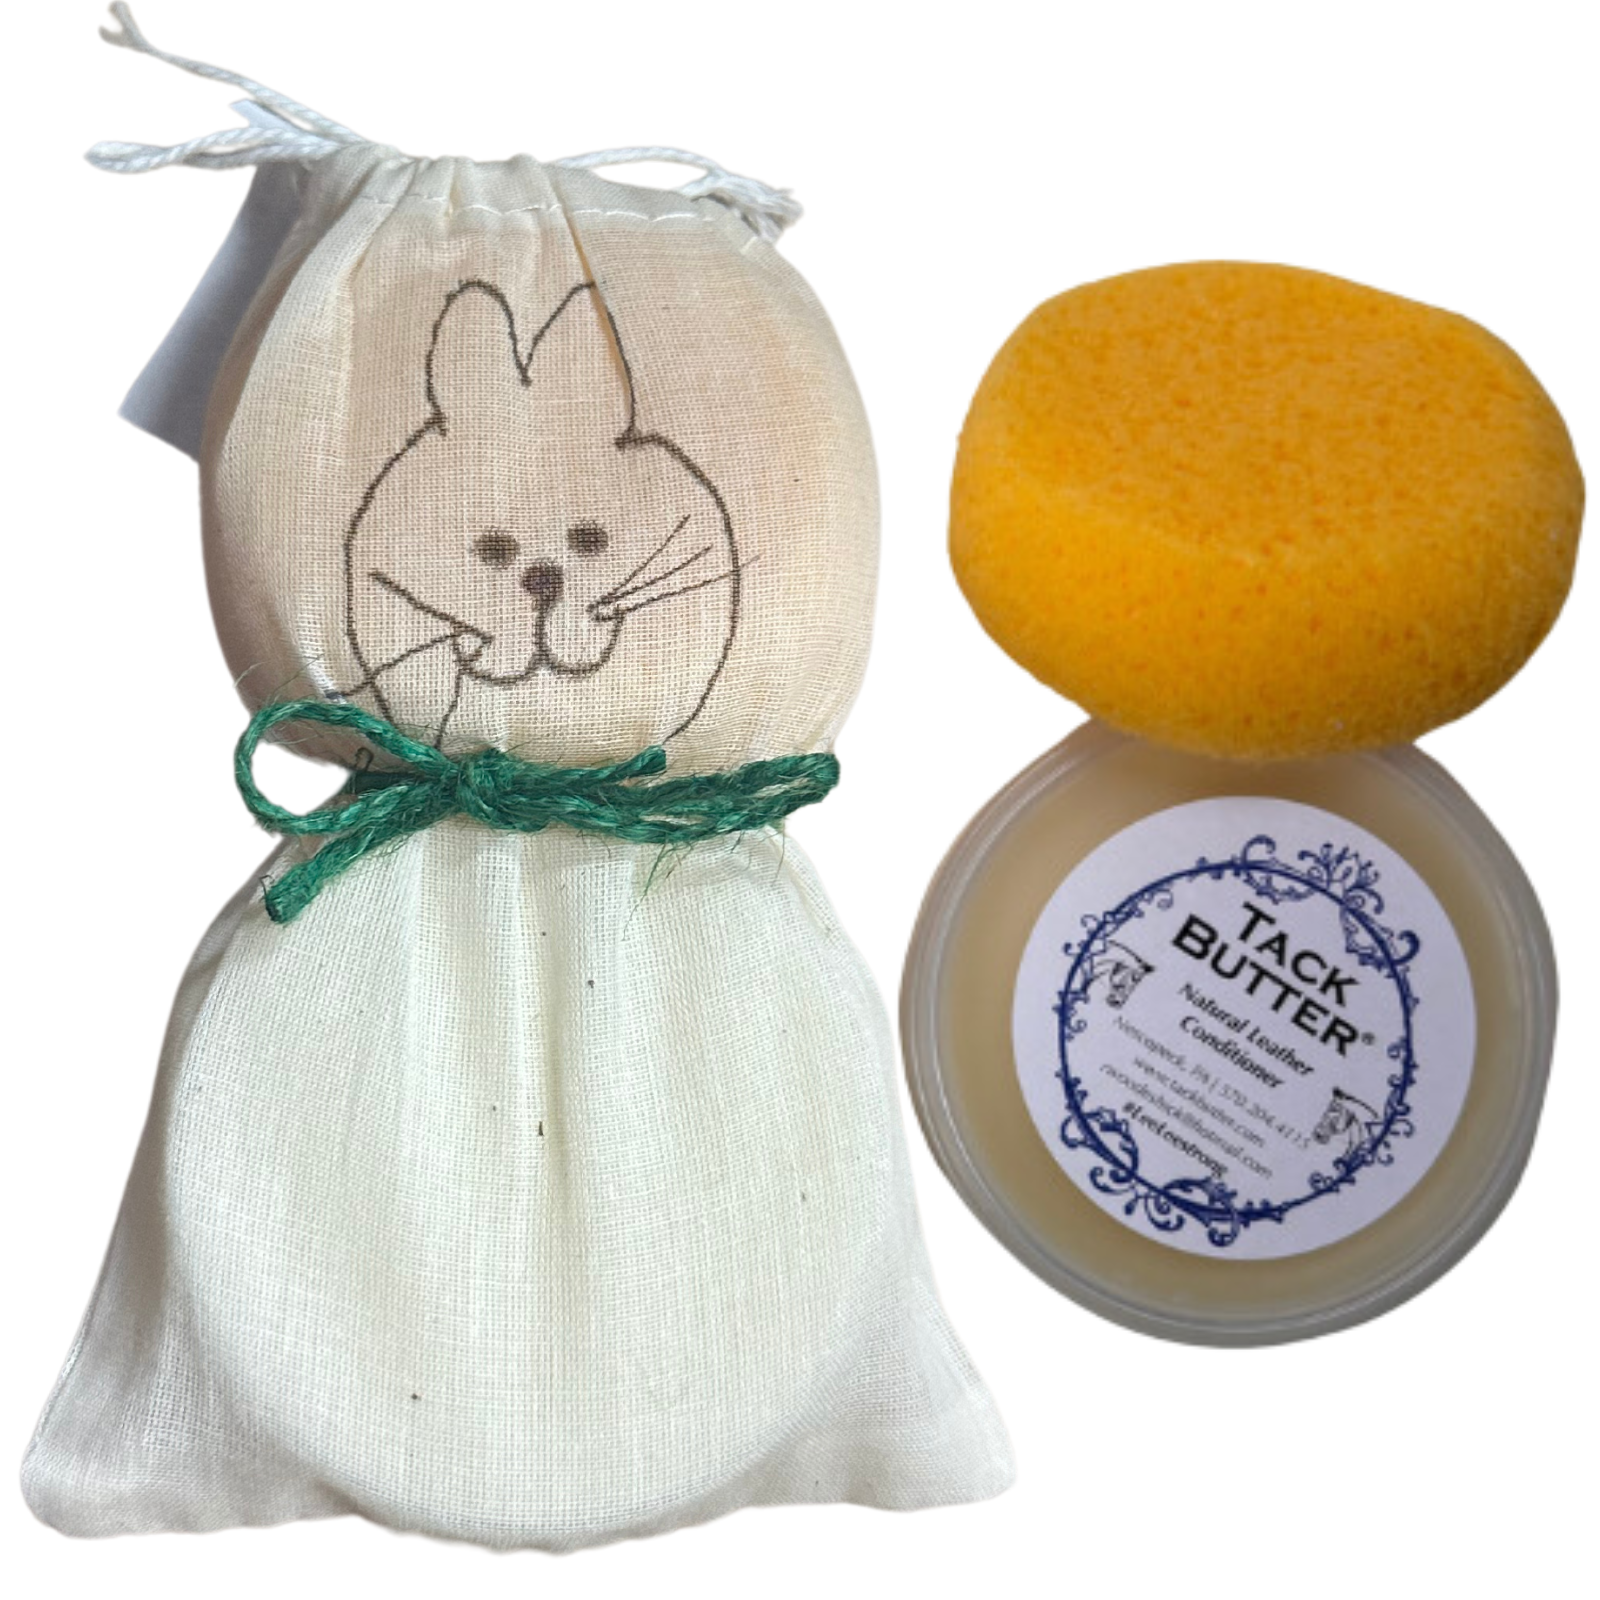 Tack Butter Natural Leather Conditioner Starter Set in Easter Bunny